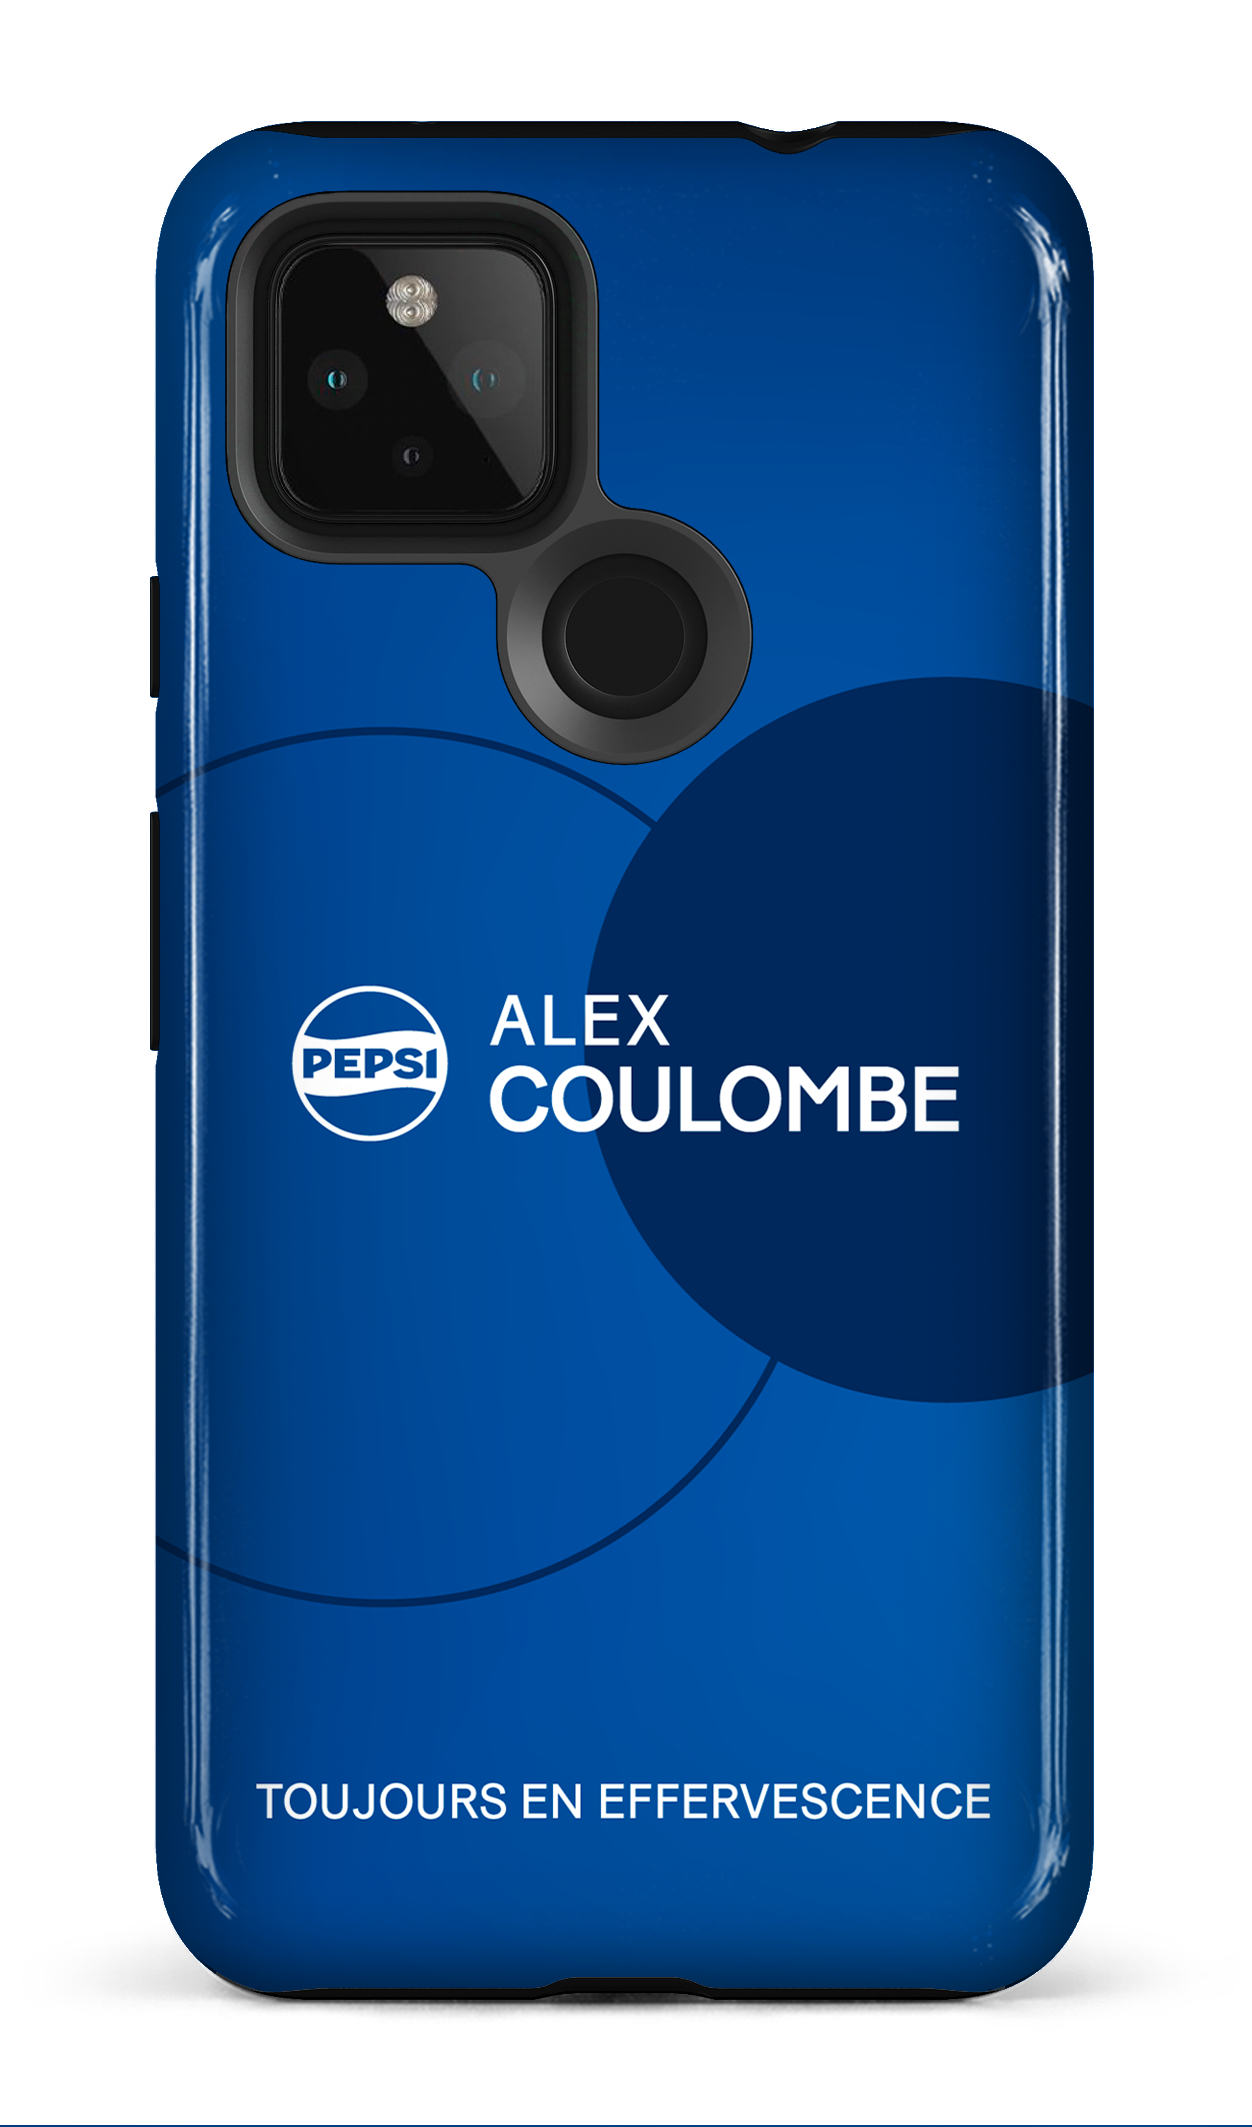 Alex Coulombe - Google Pixel 4A (5G)